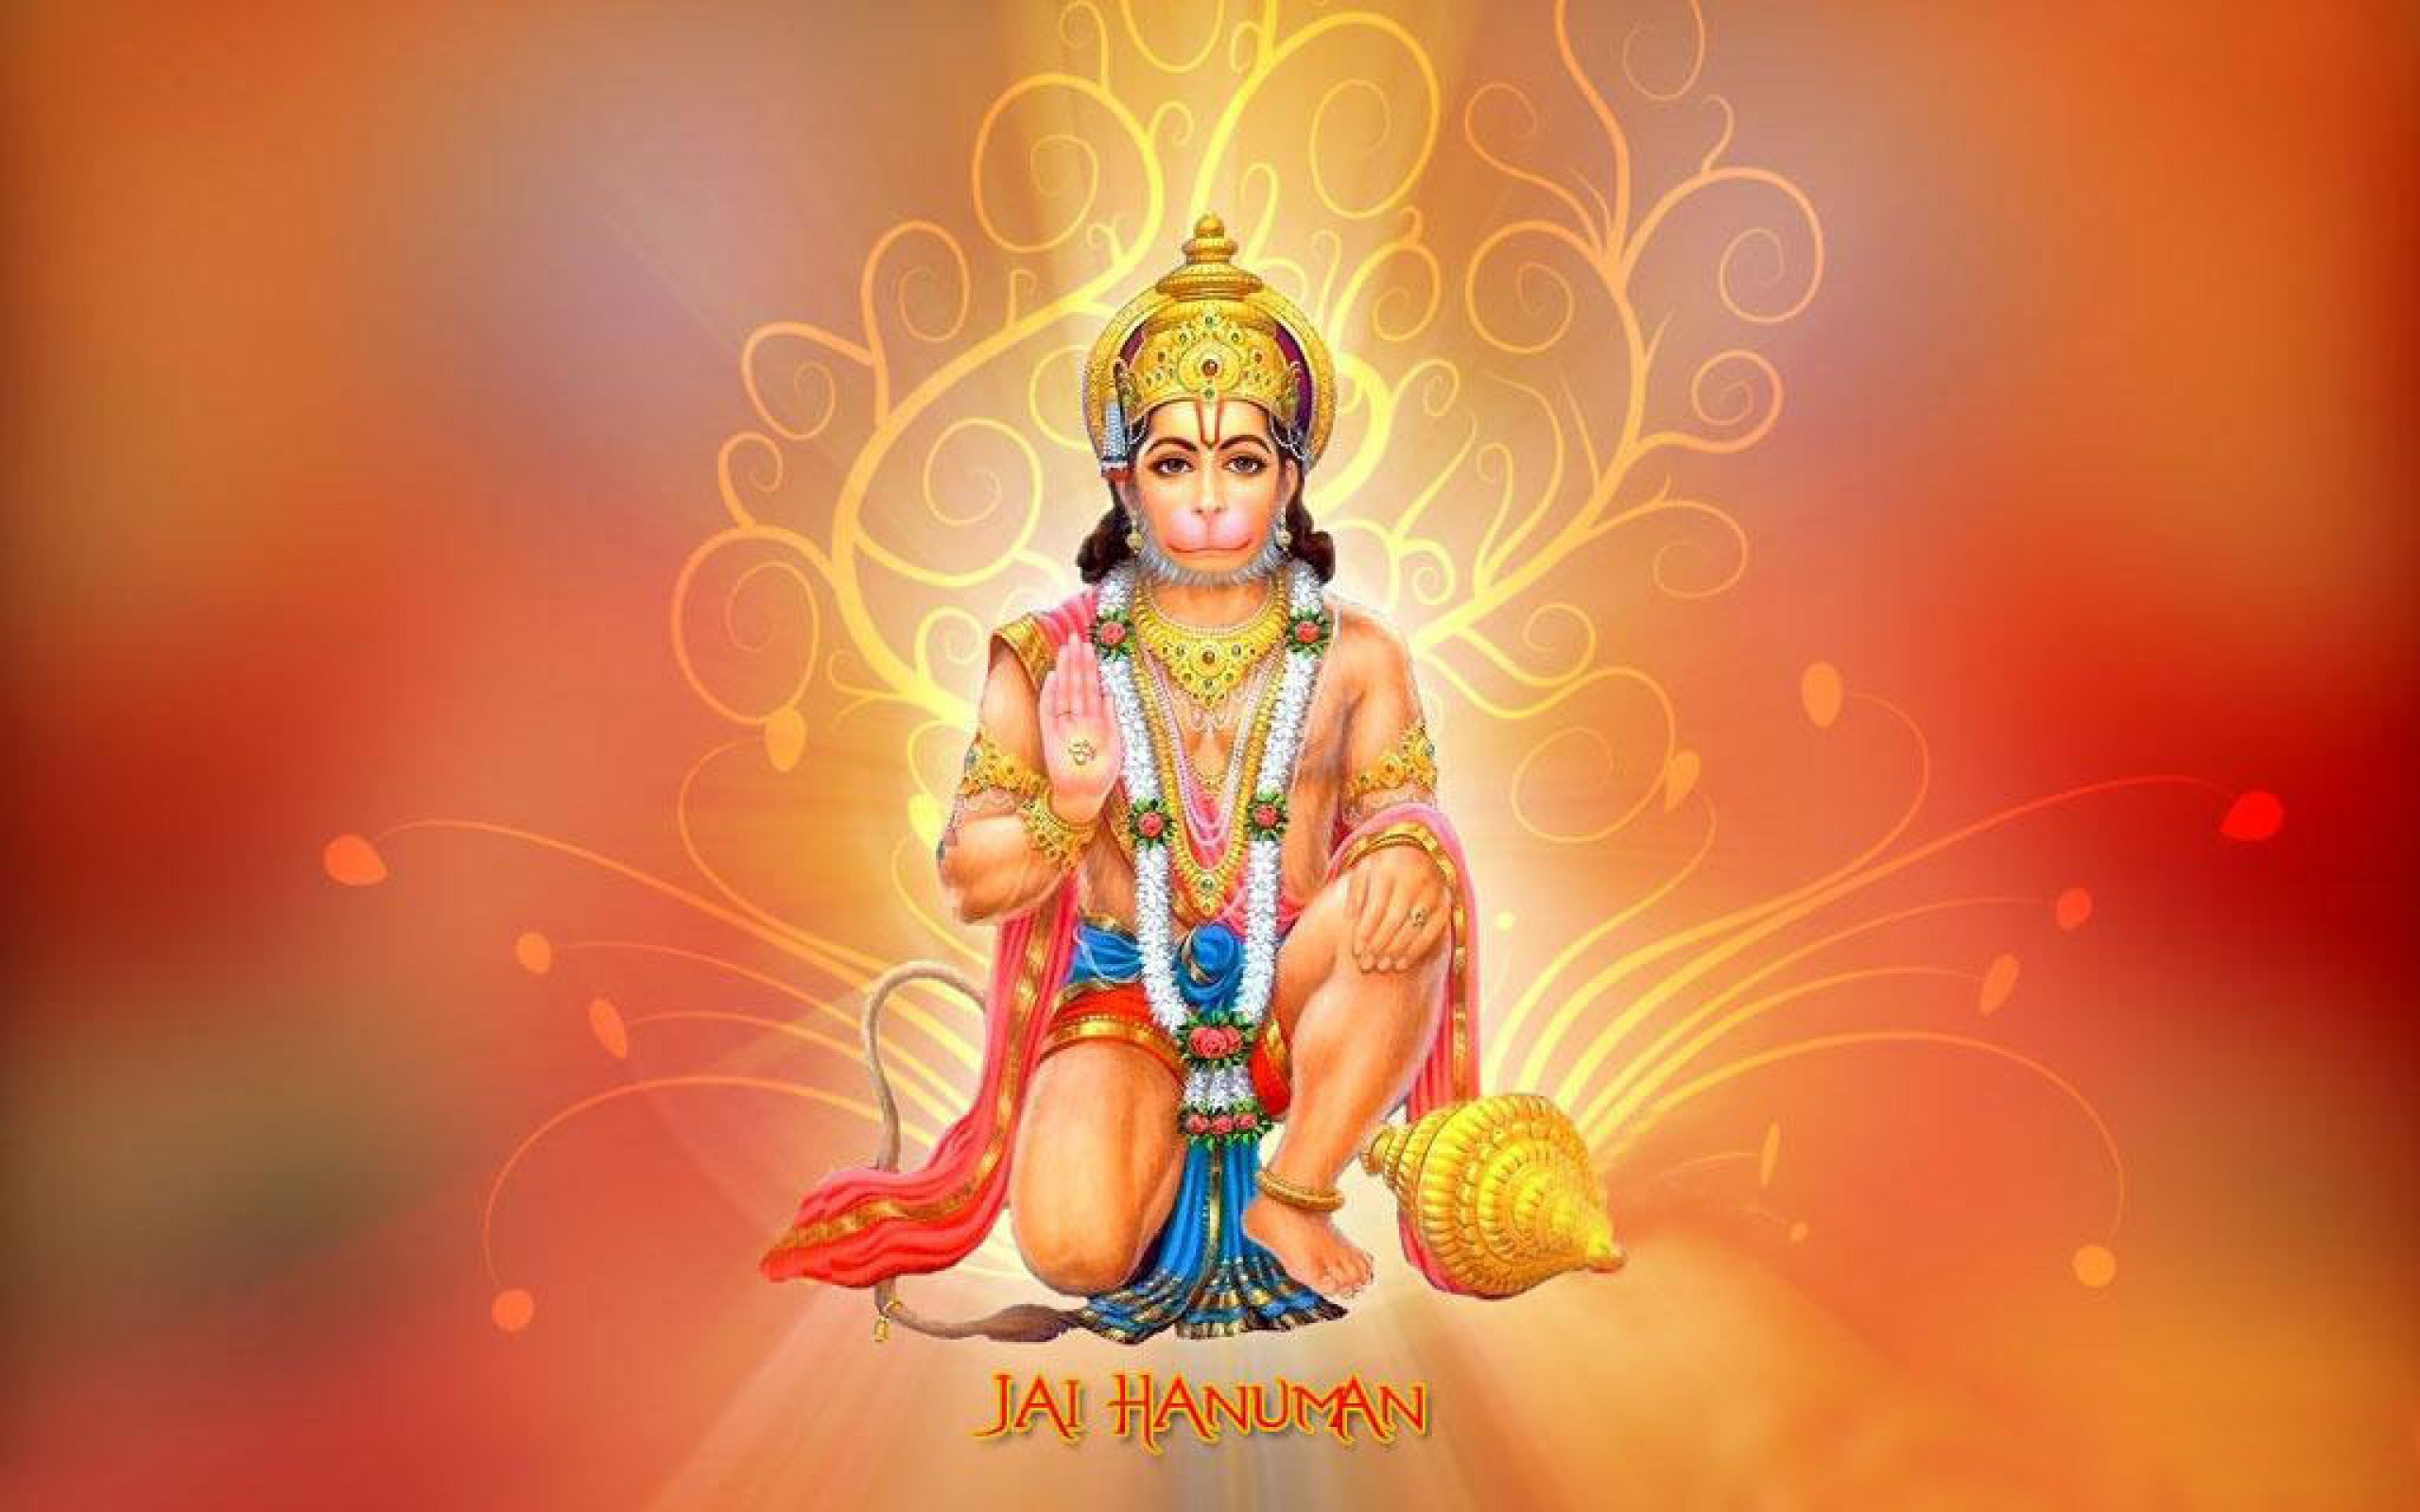 Lord Hanuman Religious Waterproof Vinyl Sticker Poster || can1880-1 Fine  Art Print - Religious posters in India - Buy art, film, design, movie,  music, nature and educational paintings/wallpapers at Flipkart.com